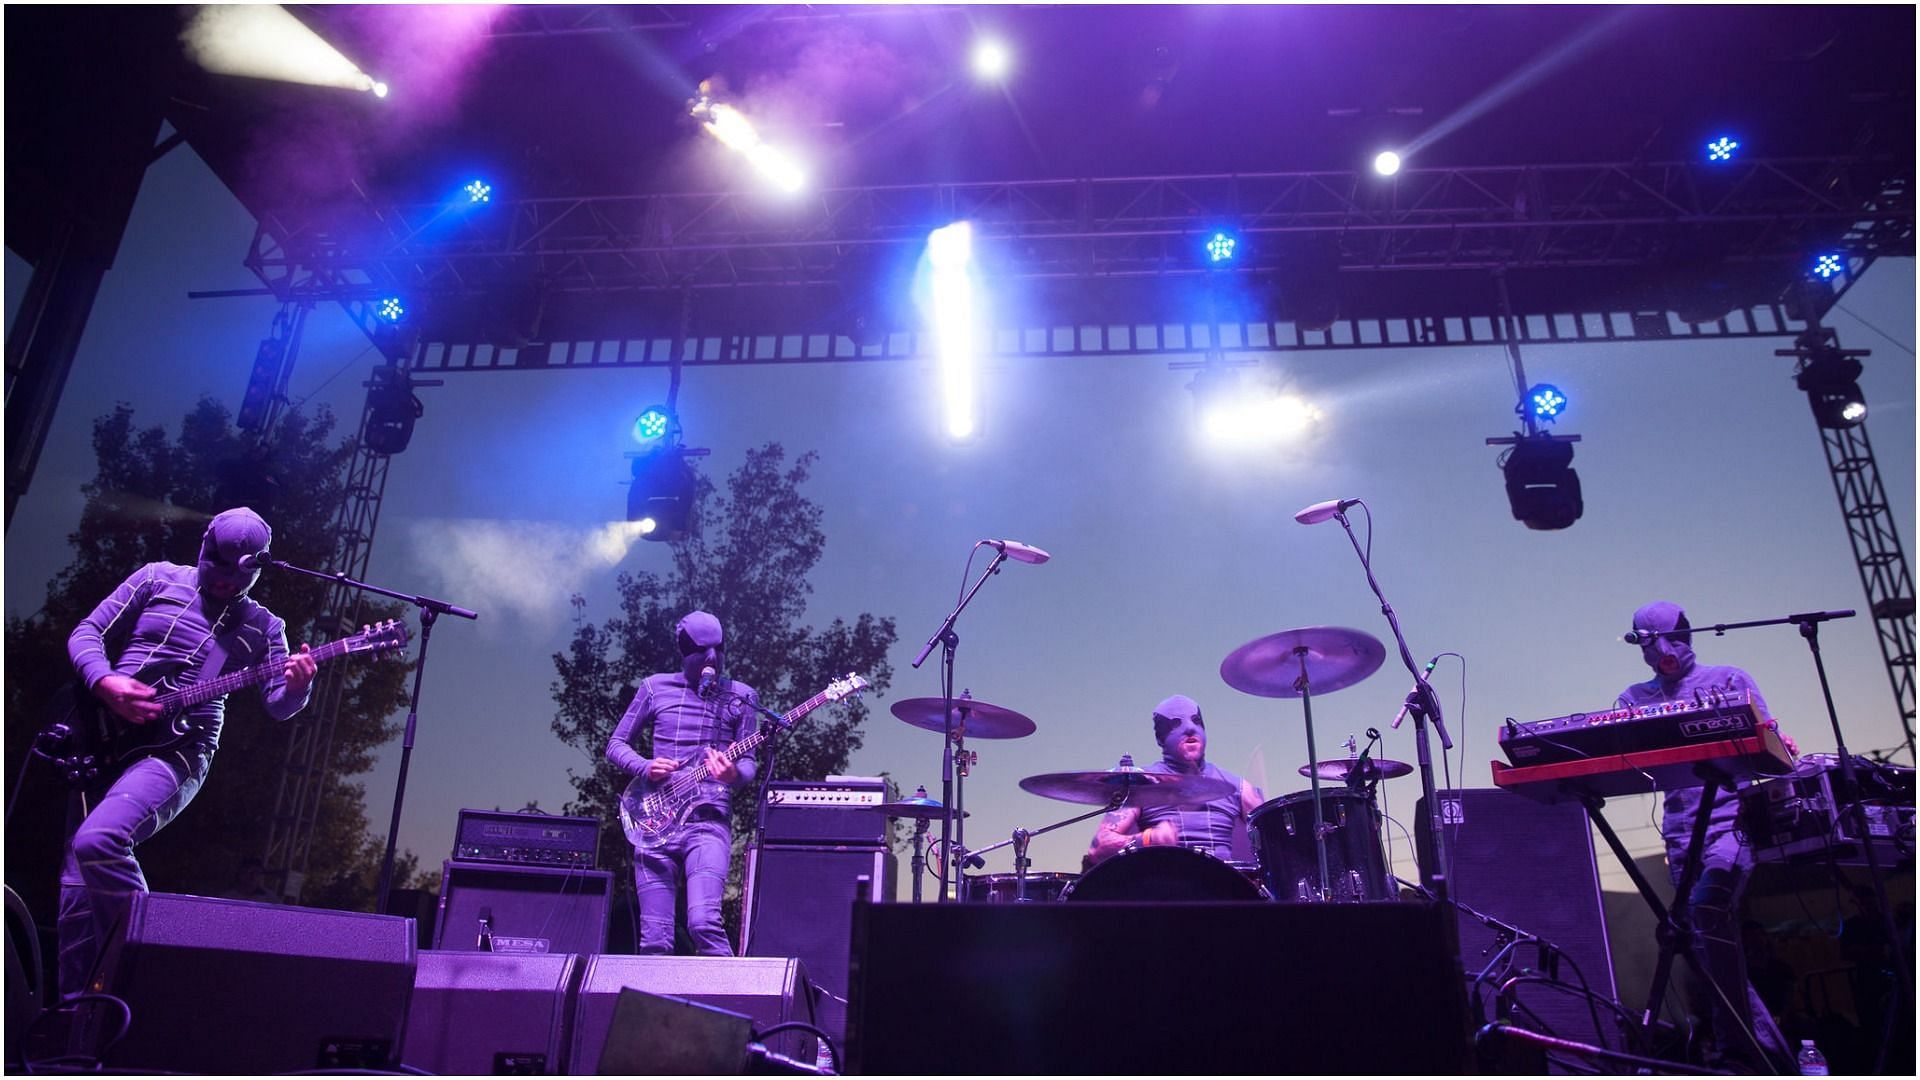 The Locust perform at the 10th annual FYF music festival at Los Angeles Historical Park (Image via Chelsea Lauren/Getty Images)